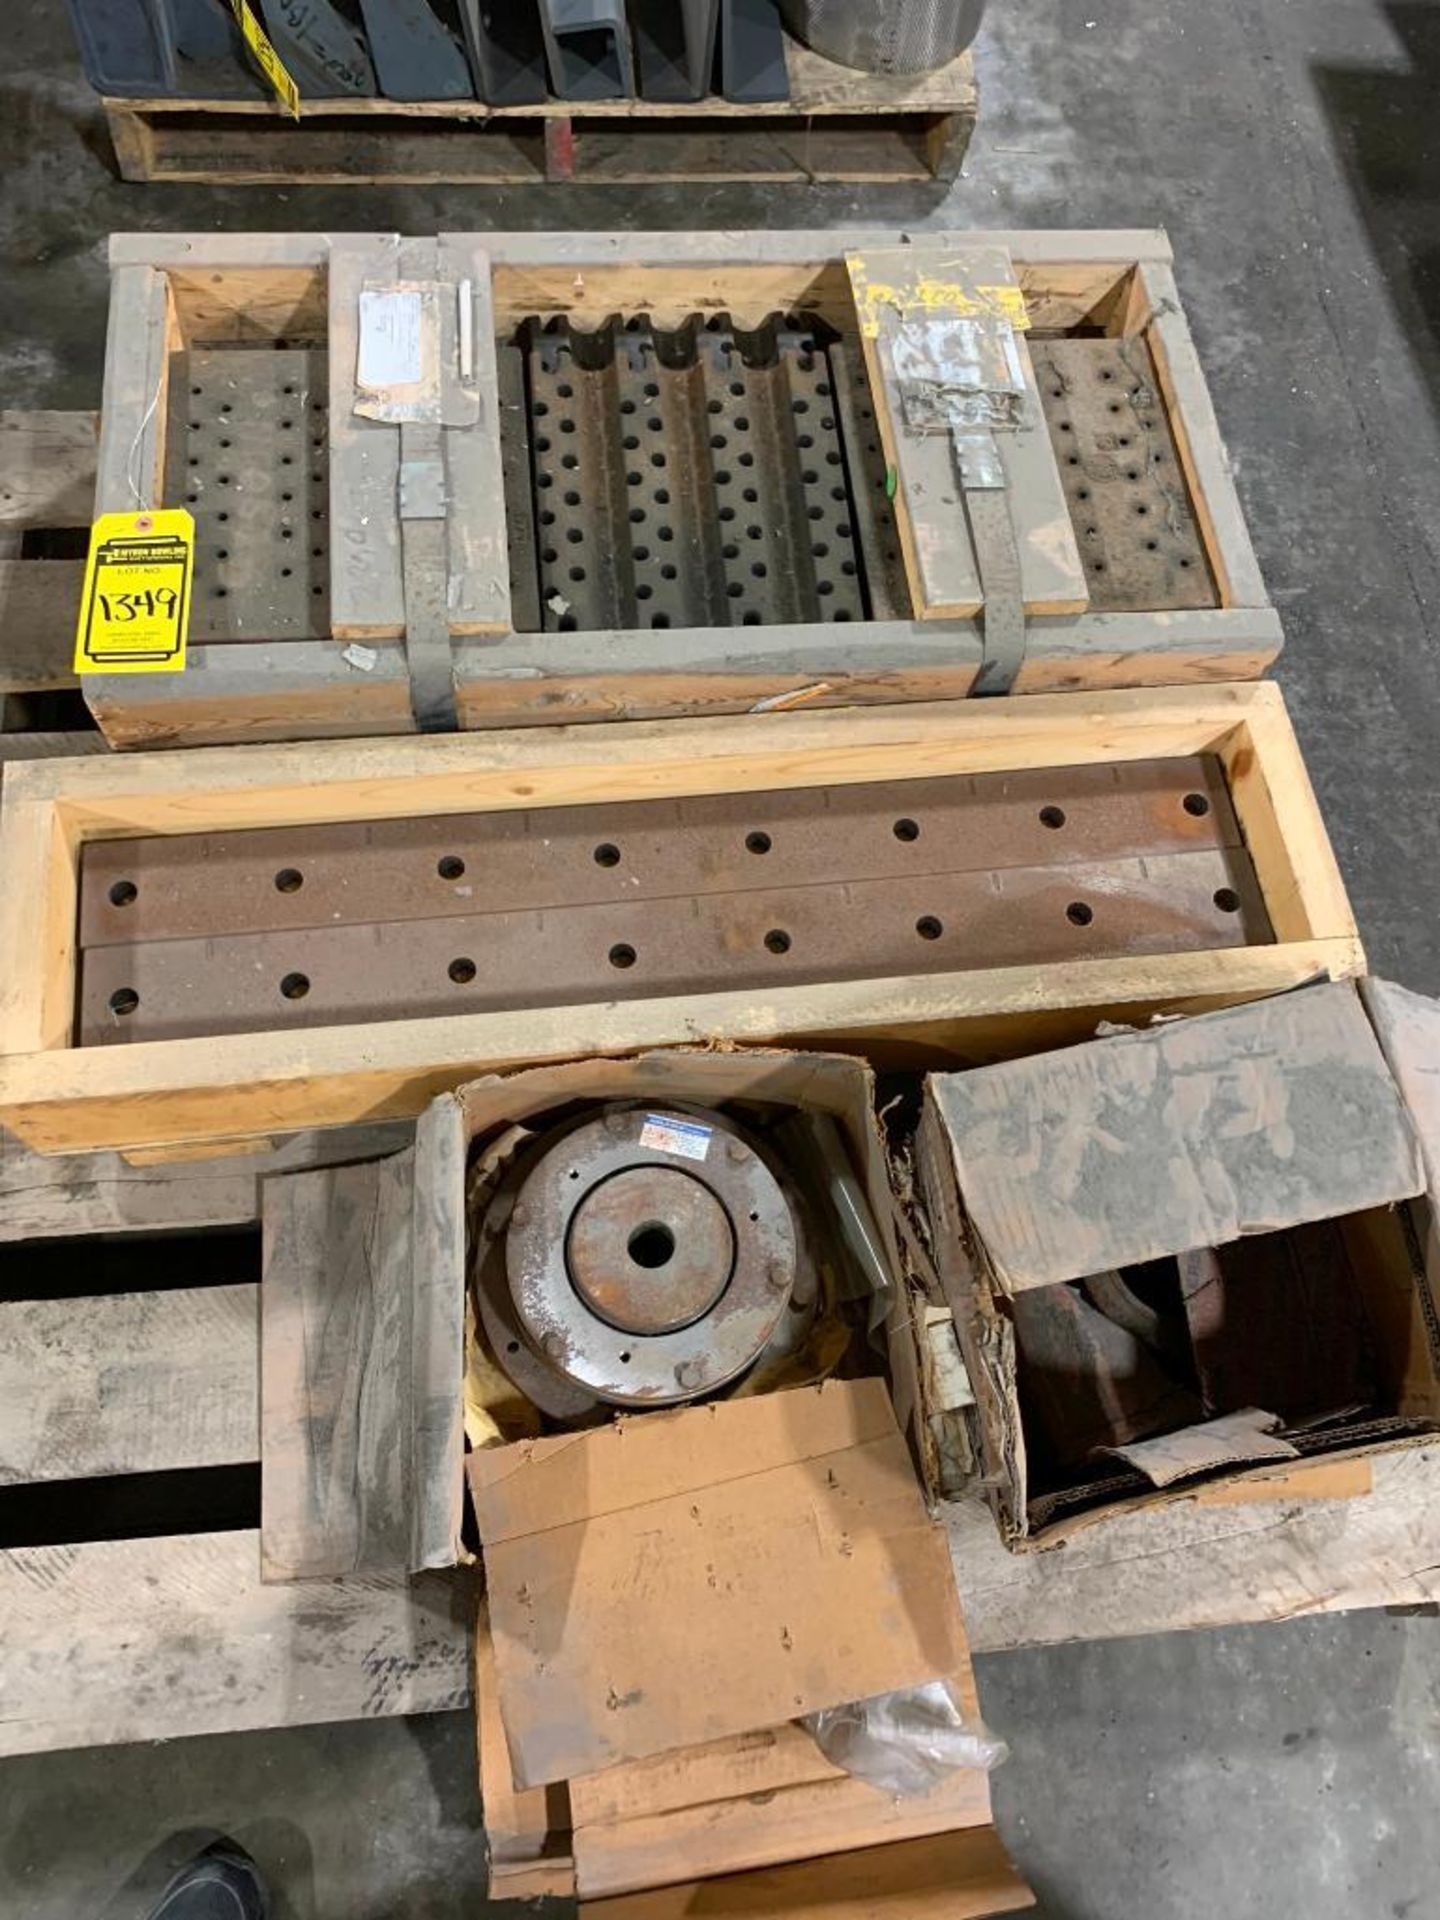 Pallet w/ Hearth Grate, Couplings - Image 2 of 4